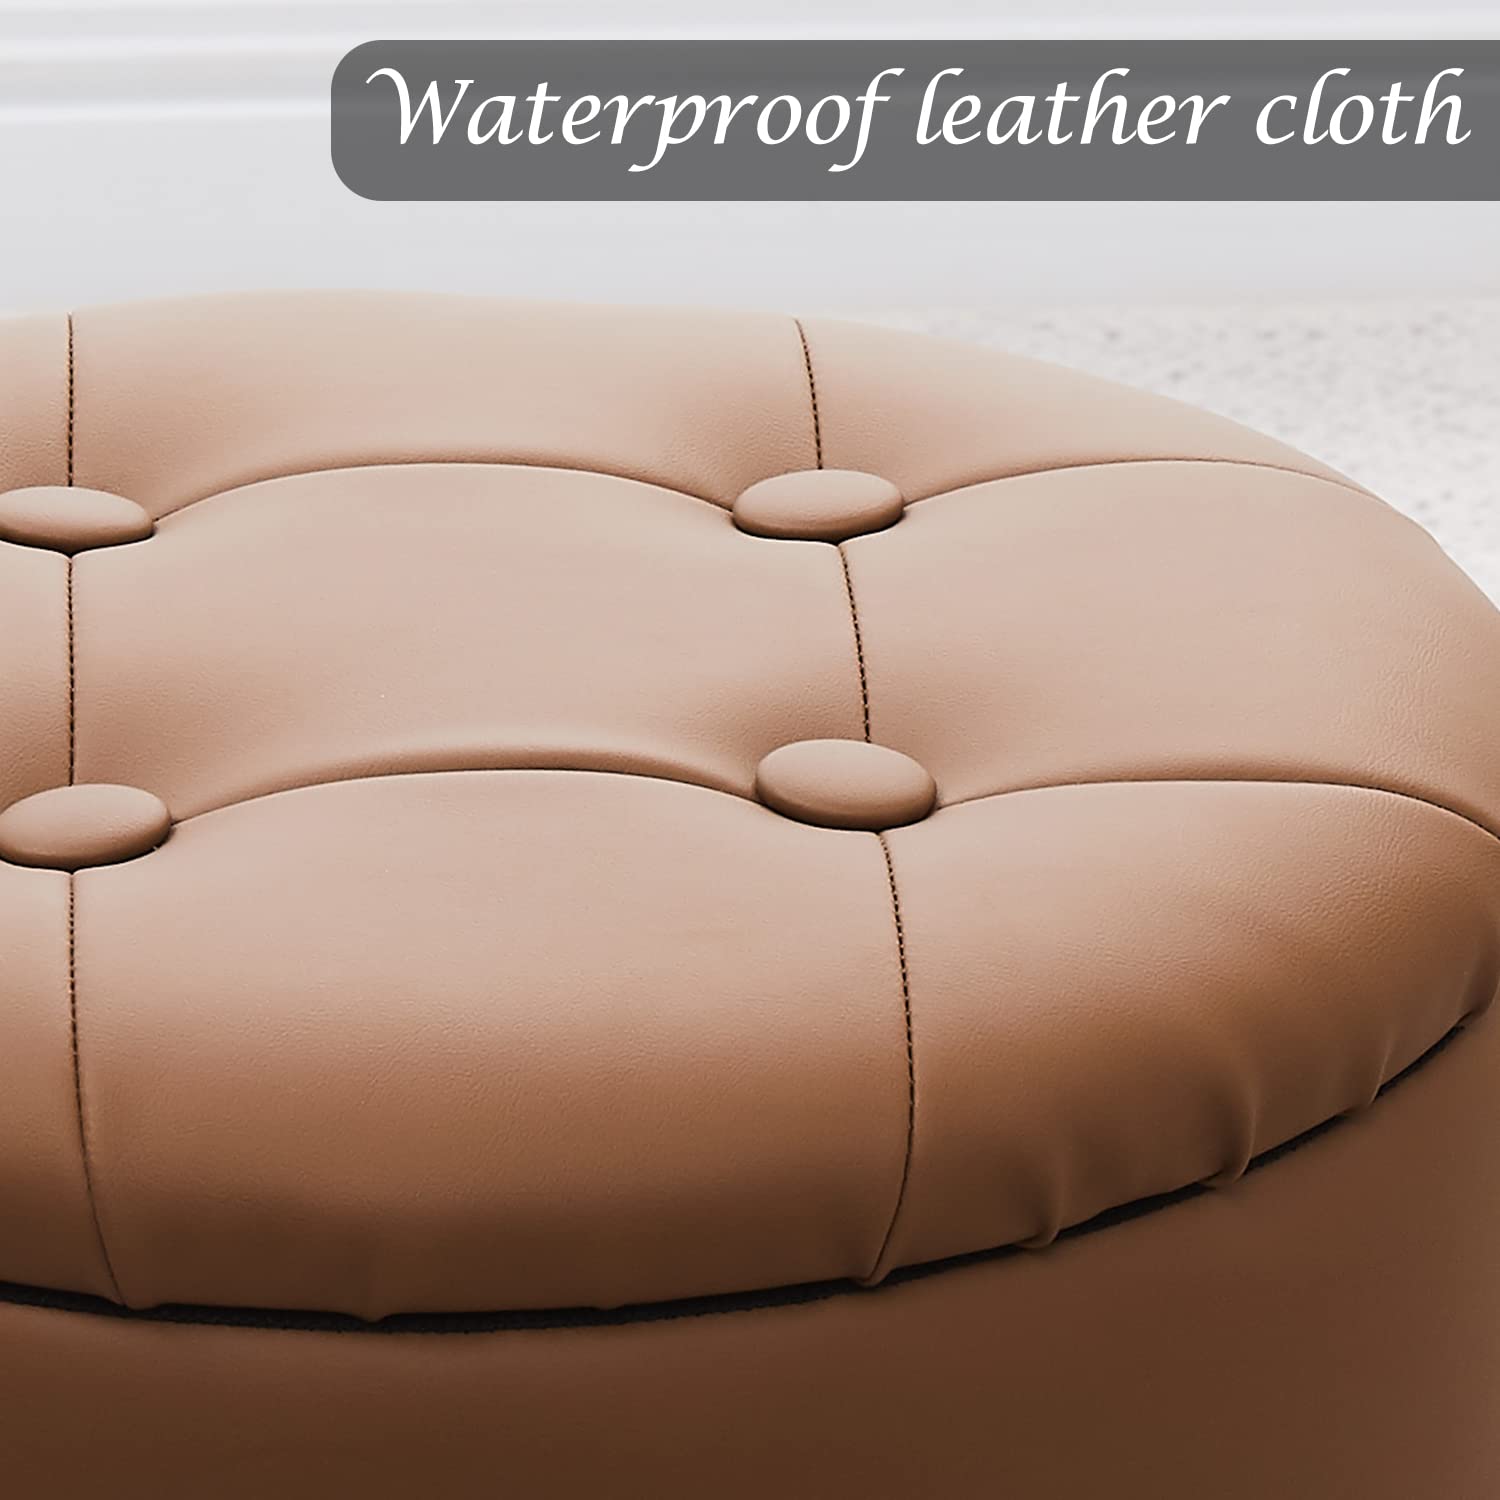 Cpintltr Modern Faux Leather Foot Rest Stool Upholstered Round Storage Ottomans Multipurpose Dressing Stools Luxury Home Decor Ottoman Coffee Table Top Cover Footstool for Couch Entryway Brown